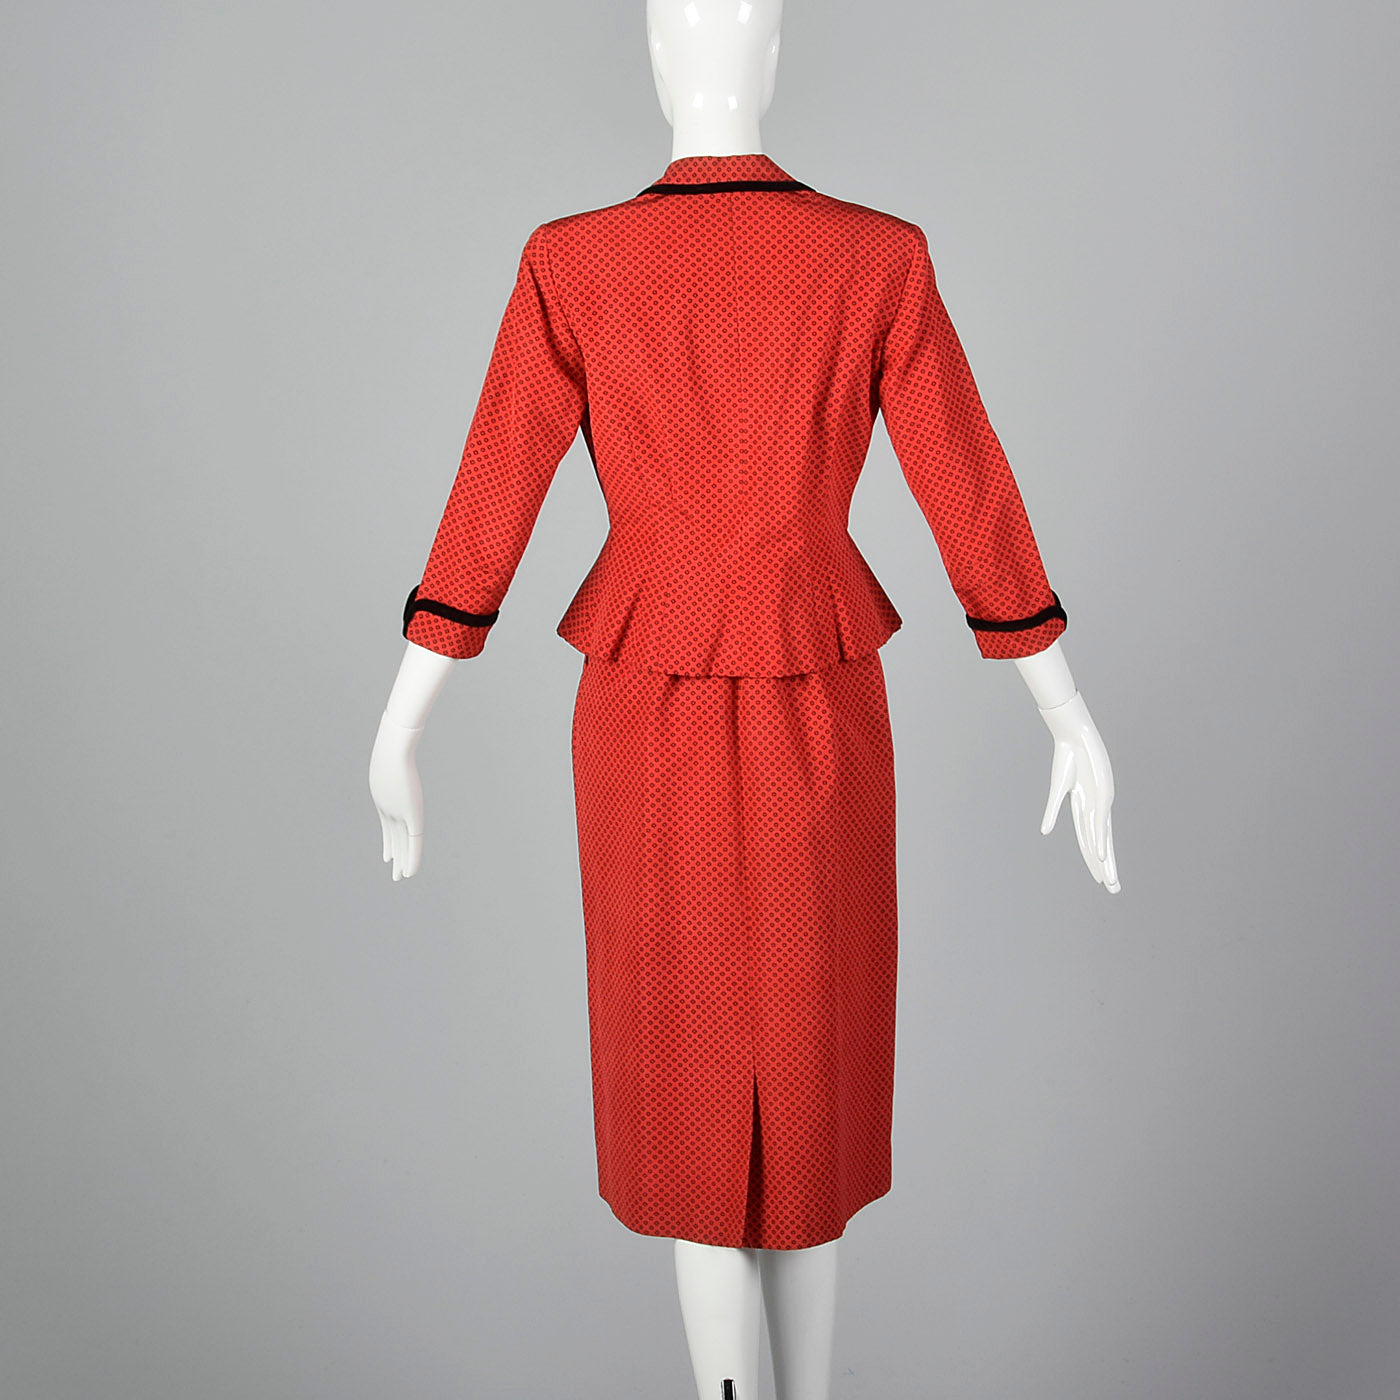 1950s L'Aiglon Red Dress with Matching Jacket